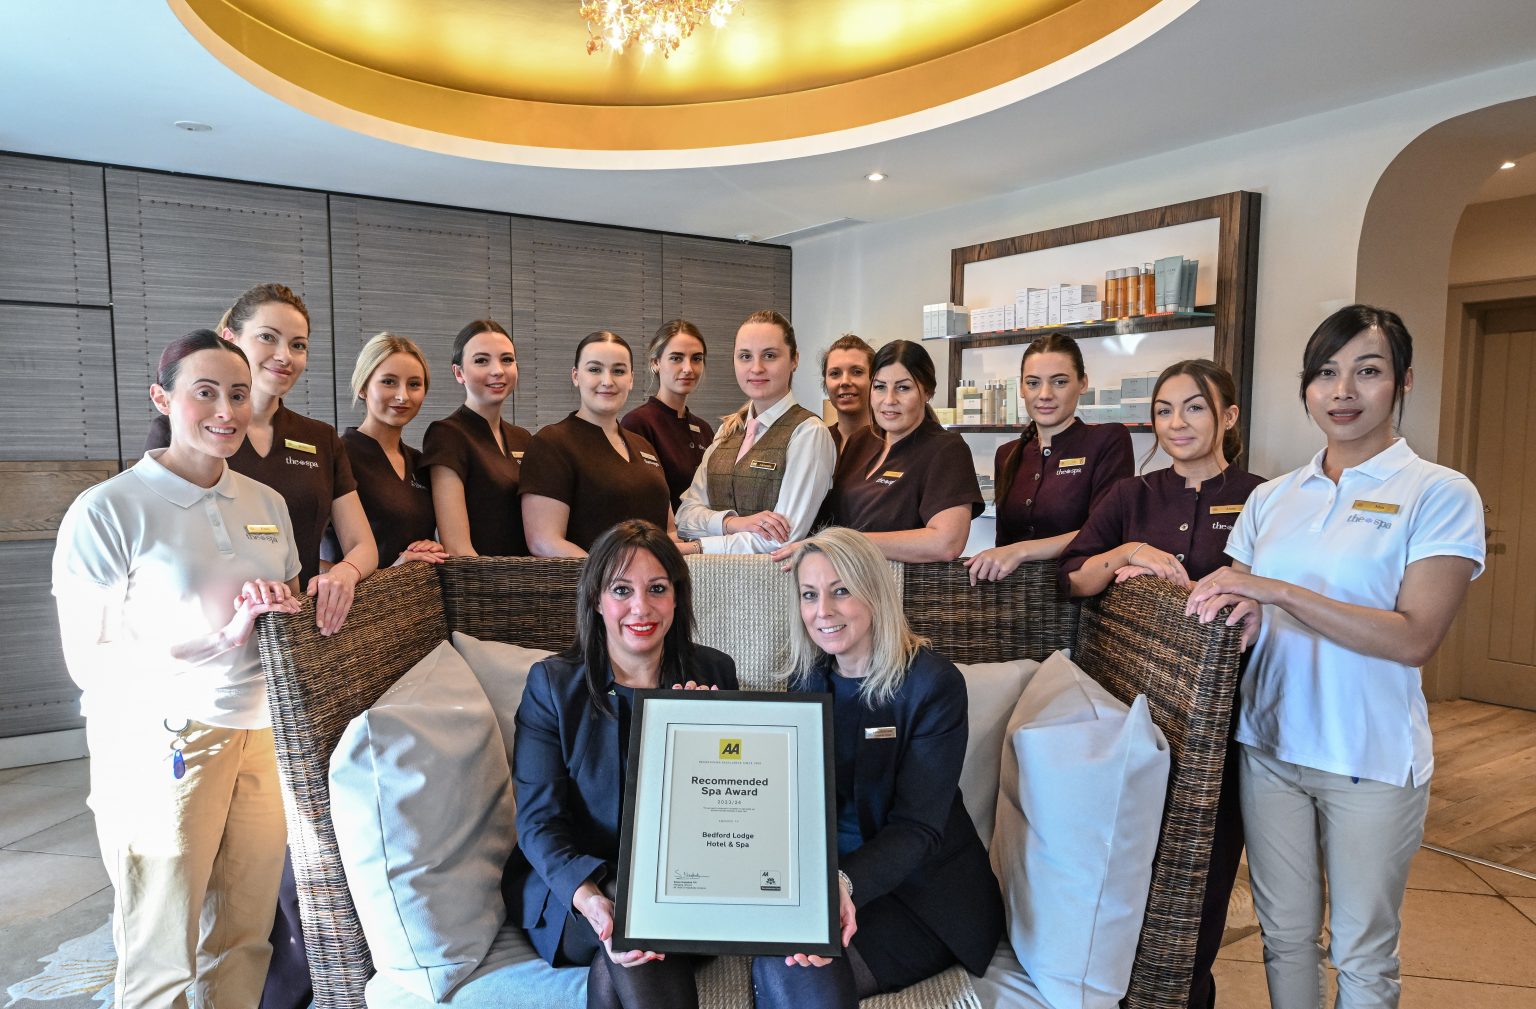 The Spa Is Named Amongst Uks Recommended Spas By Aa Bedford Lodge Hotel Spa